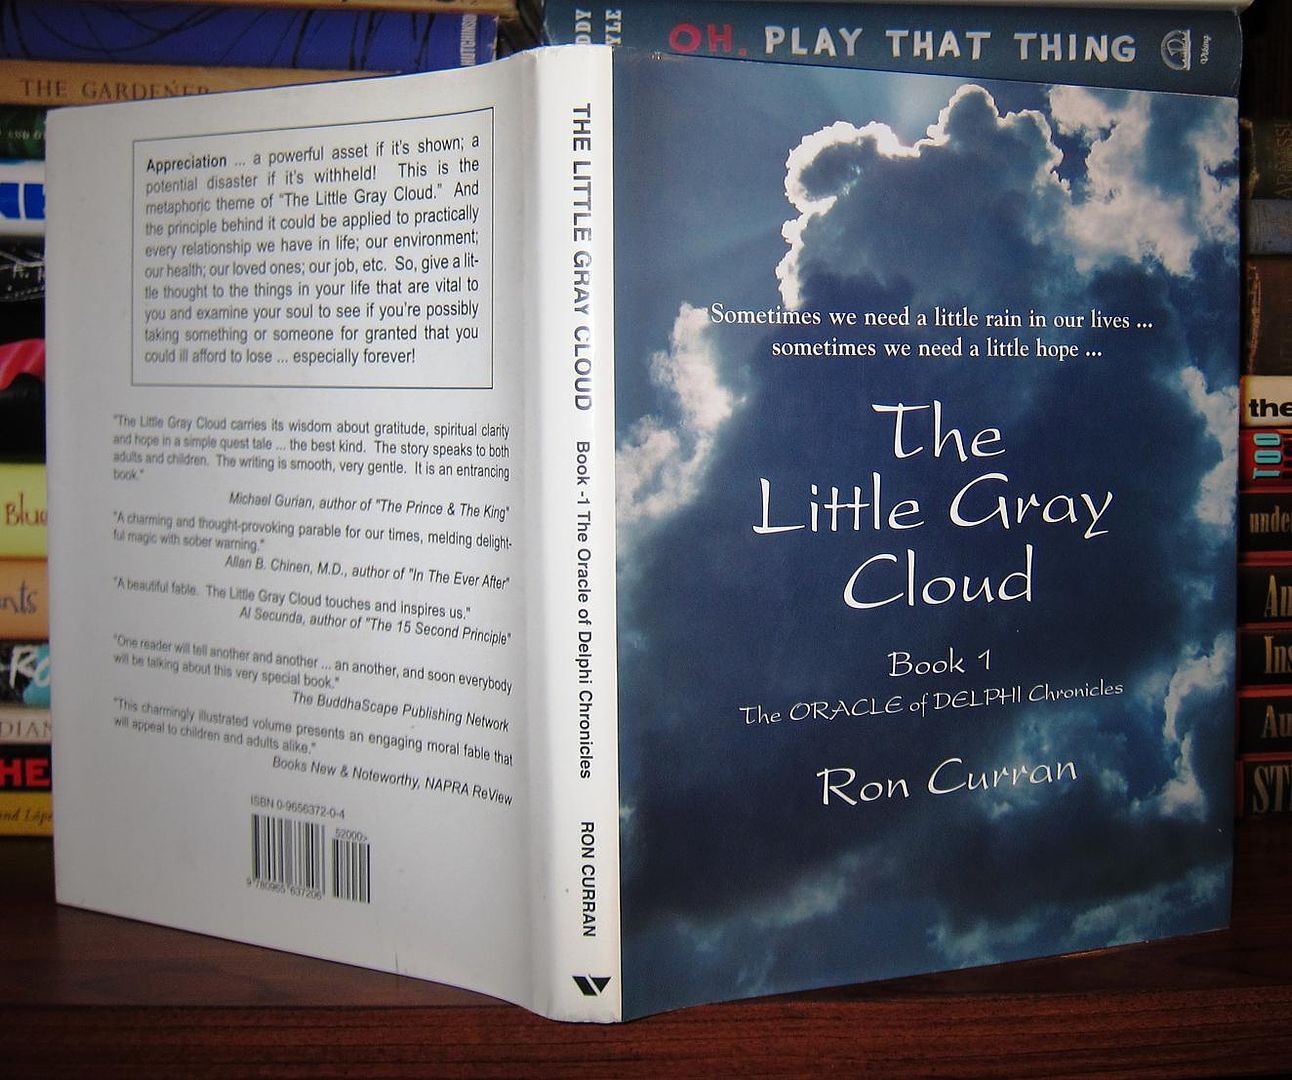 Curran, Ron THE LITTLE GRAY CLOUD Oracle of Delphi Chronicles, Book 1 1st Editio